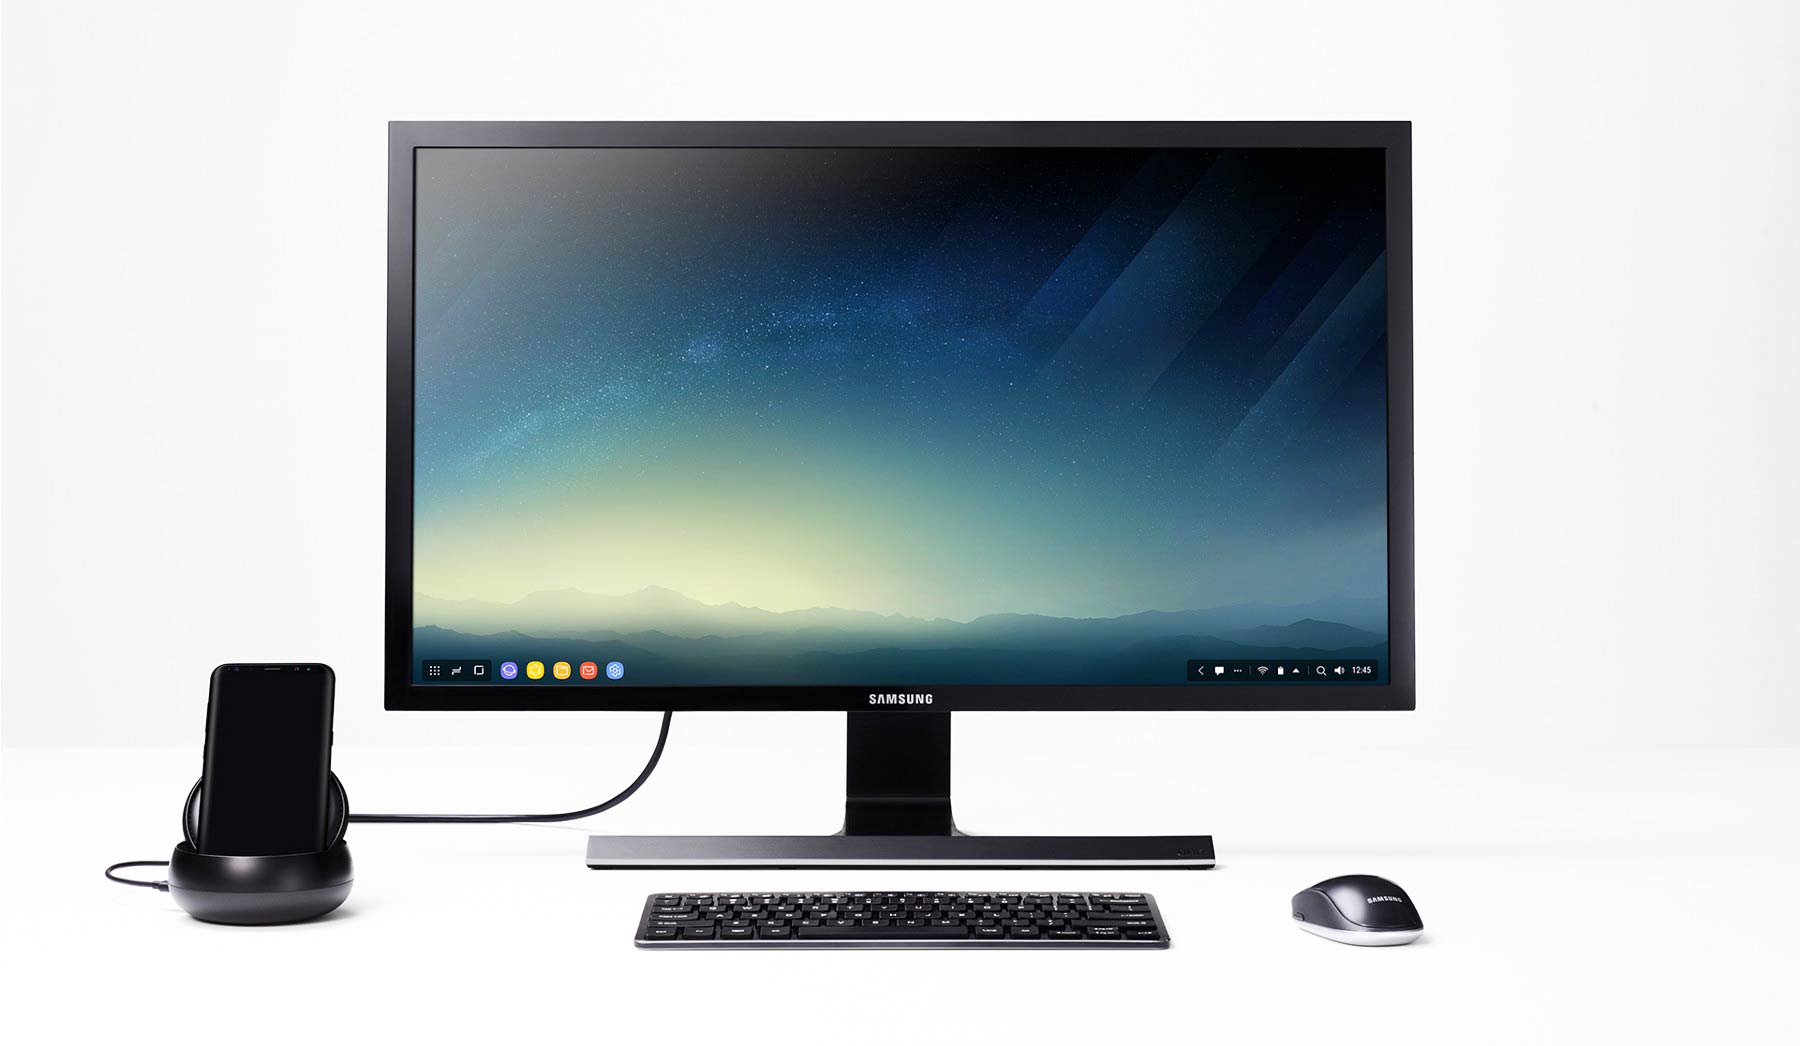 Samsung Galaxy S8 plugged into a DeX Station - with a connected screen, mouse and keyboard